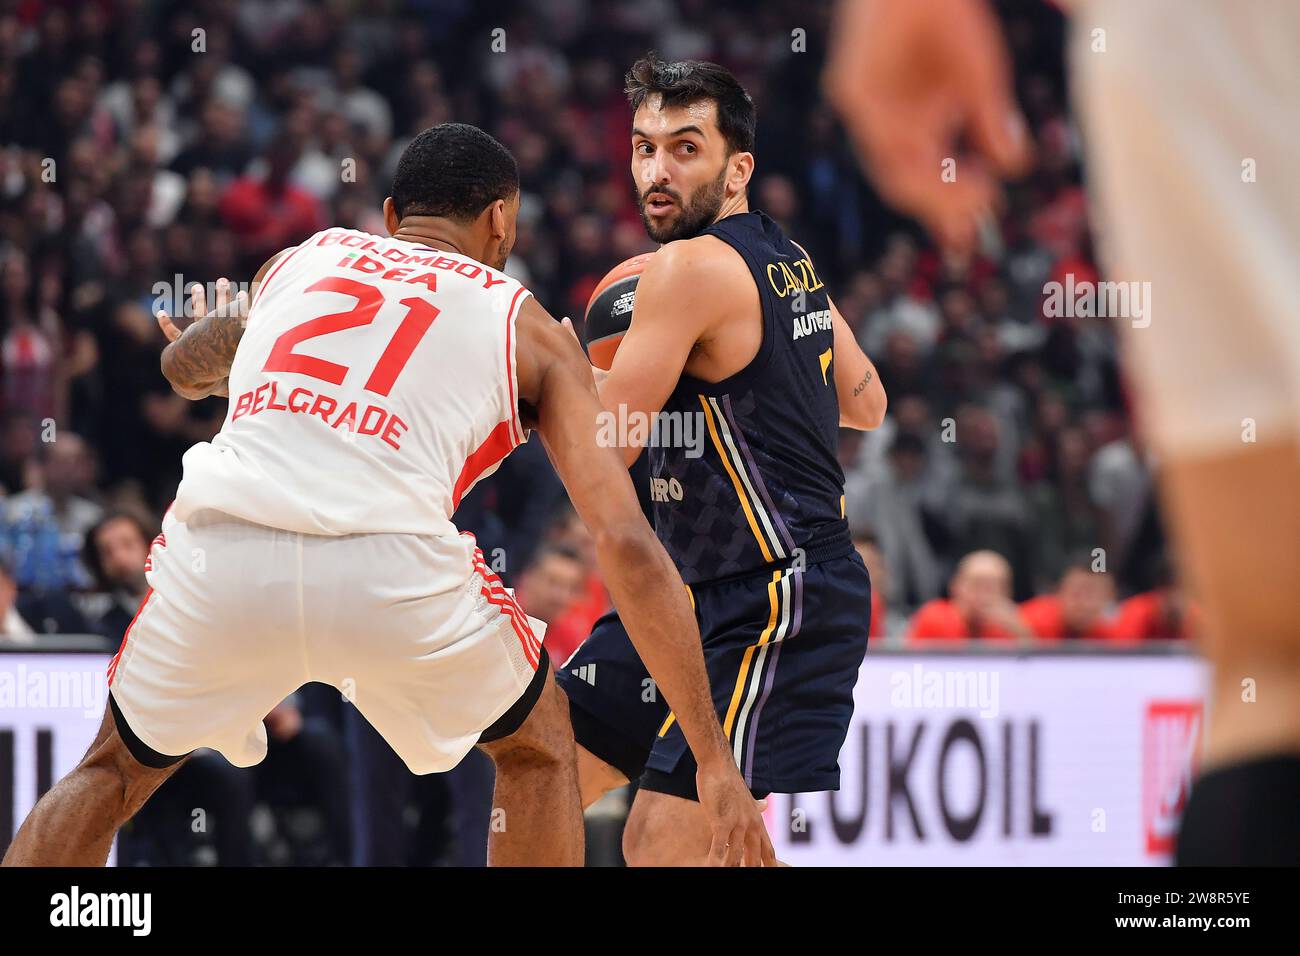 Belgrade, Serbia, 19 December, 2023. Facundo Campazzo of Real Madrid in action during the 2023/2024 Turkish Airlines EuroLeague match between Crvena Zvezda Meridianbet Belgrade and Real Madrid at Aleksandar Nikolic Hall in Belgrade, Serbia. December 19, 2023. Credit: Nikola Krstic/Alamy Stock Photo